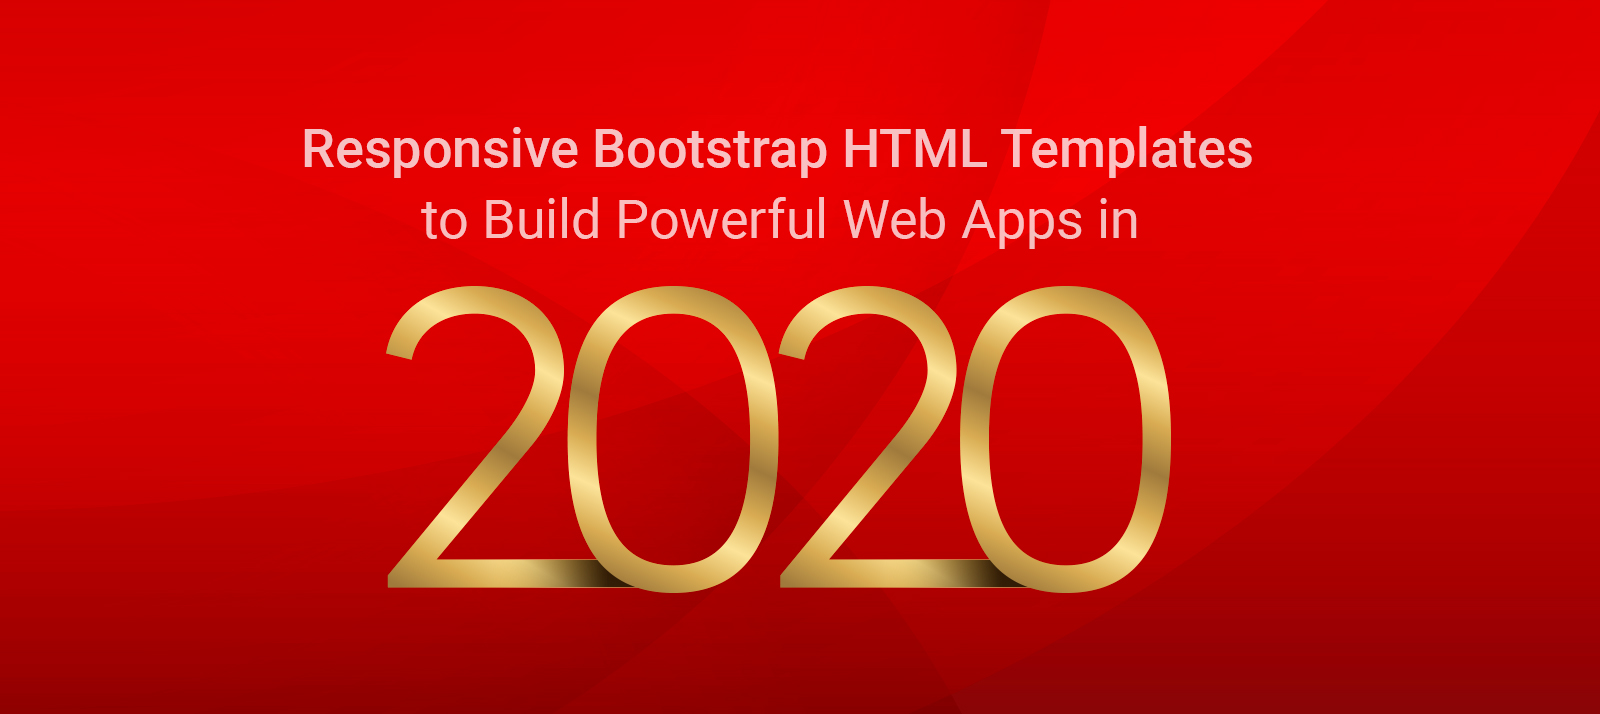  Responsive Bootstrap HTML Templates to Build Powerful Web Apps in 2020 